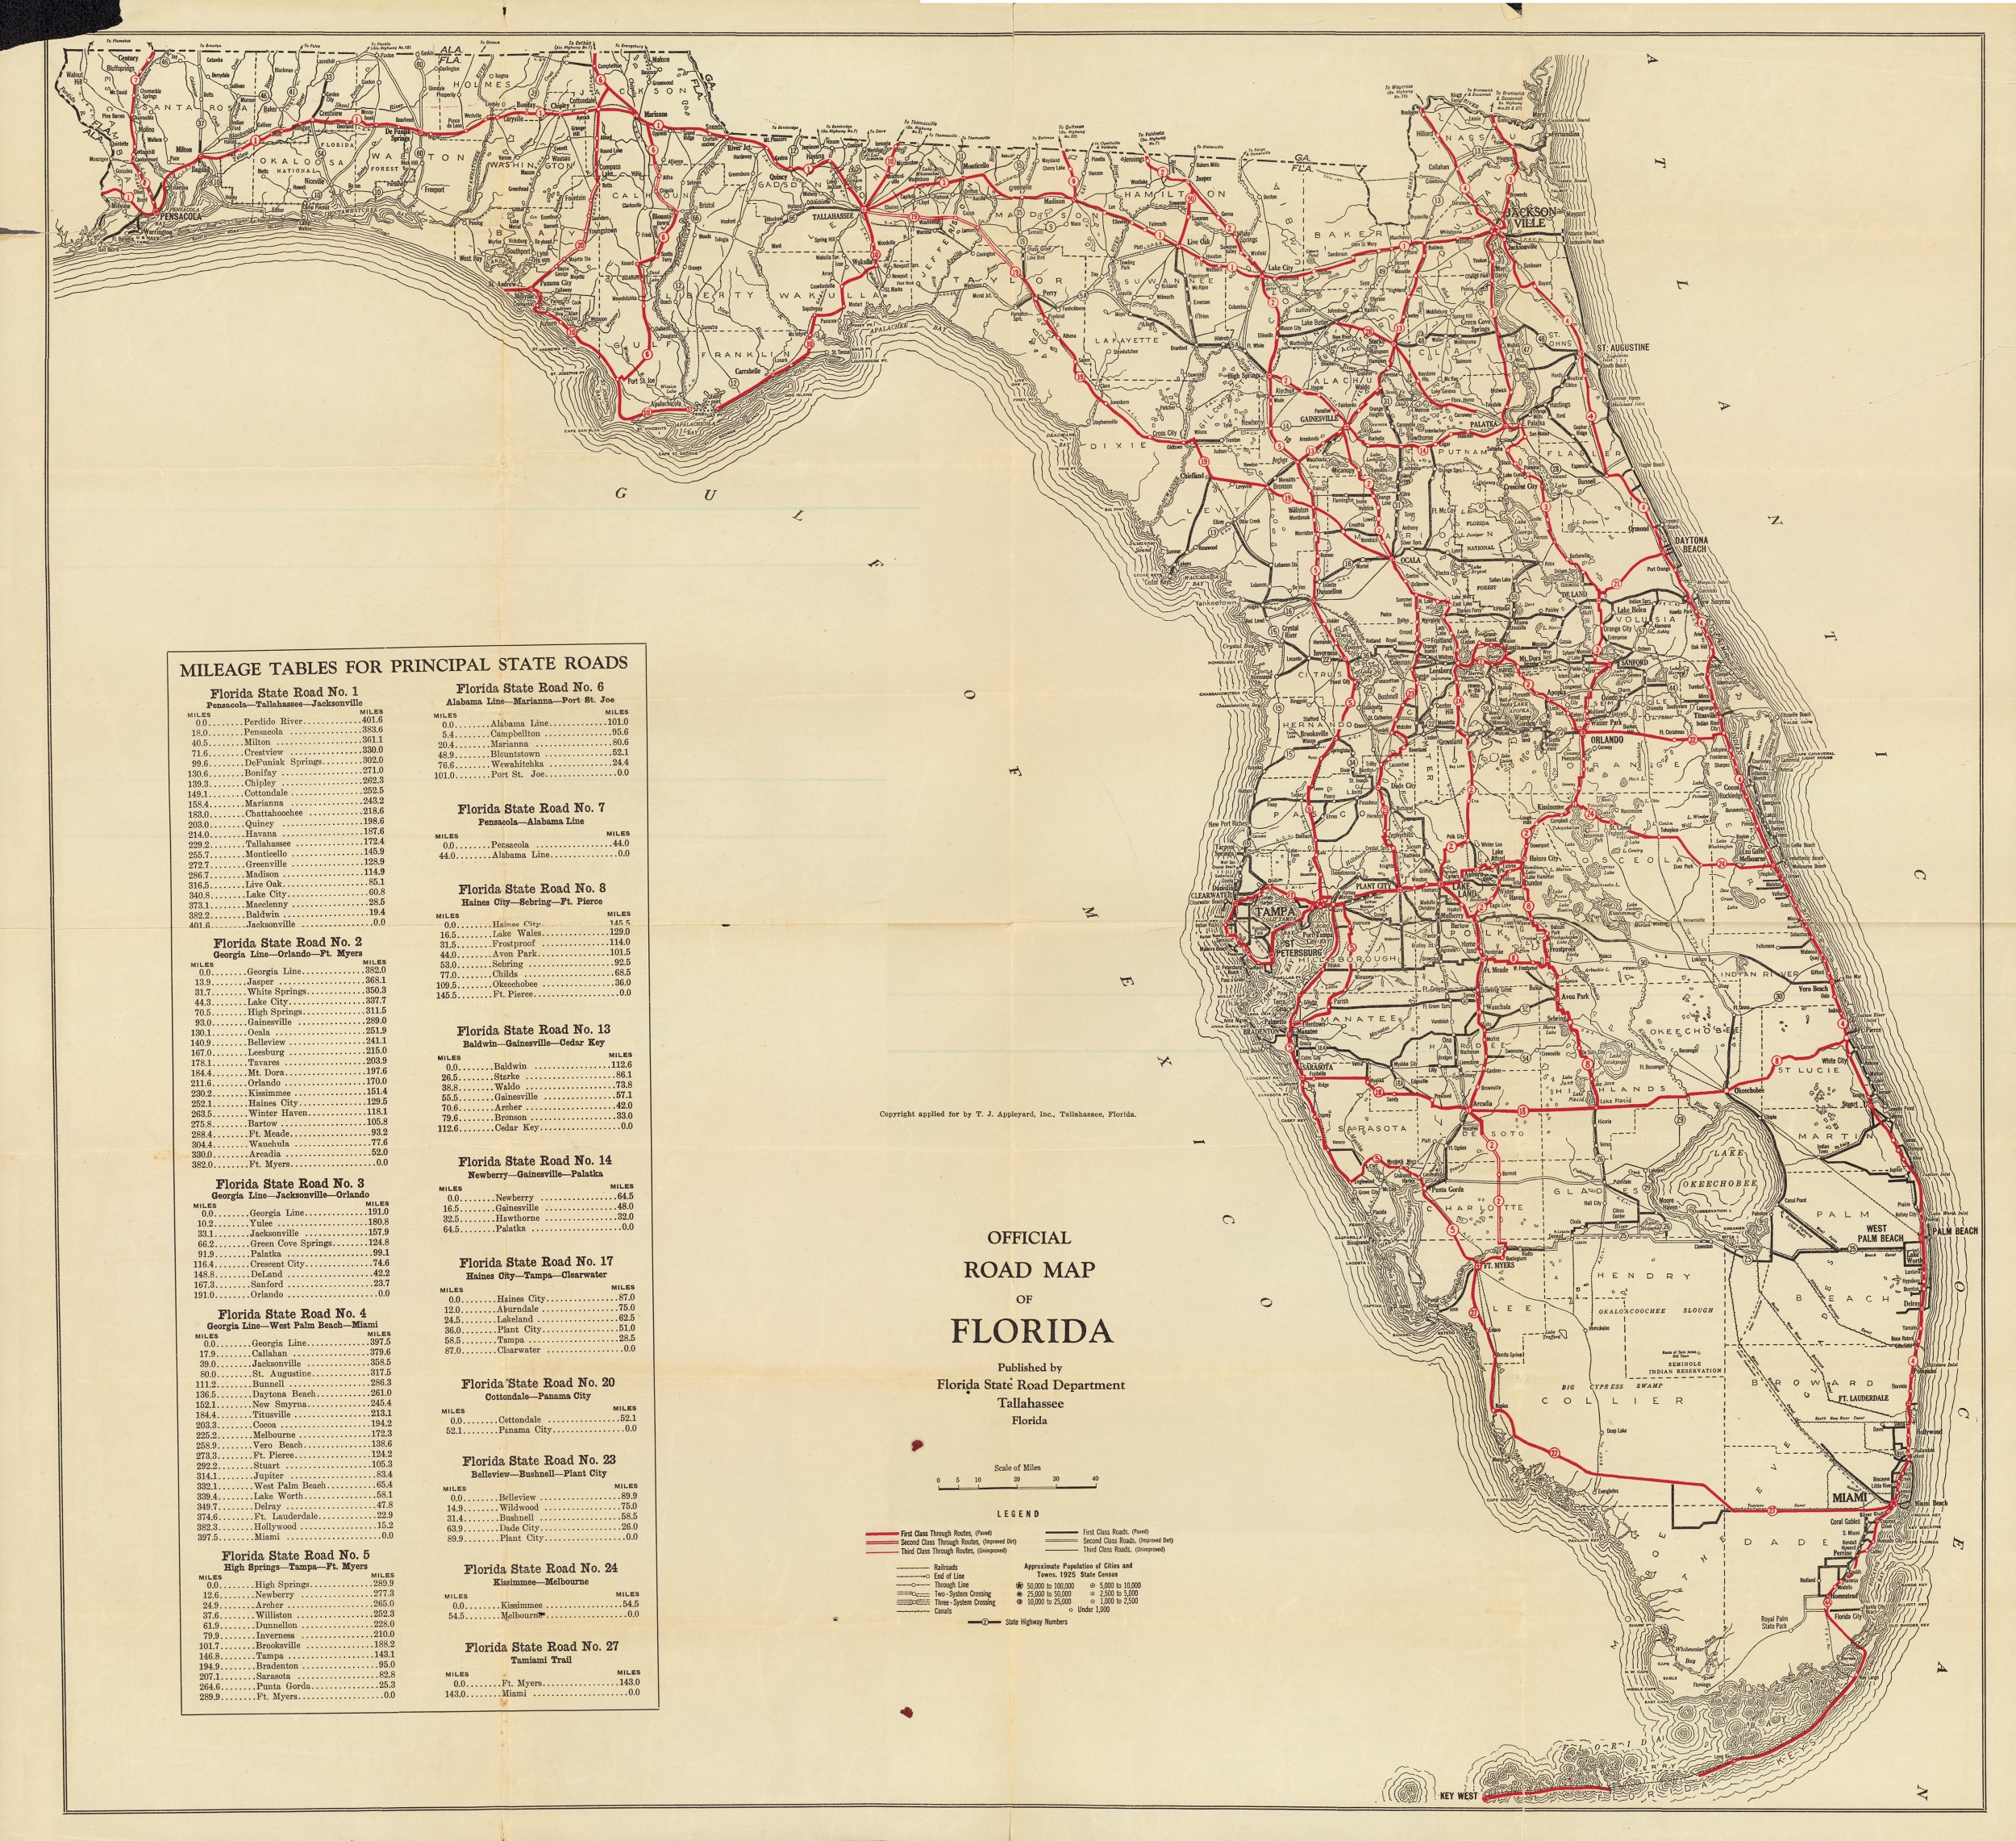 Official Road Map of Florida, 1930